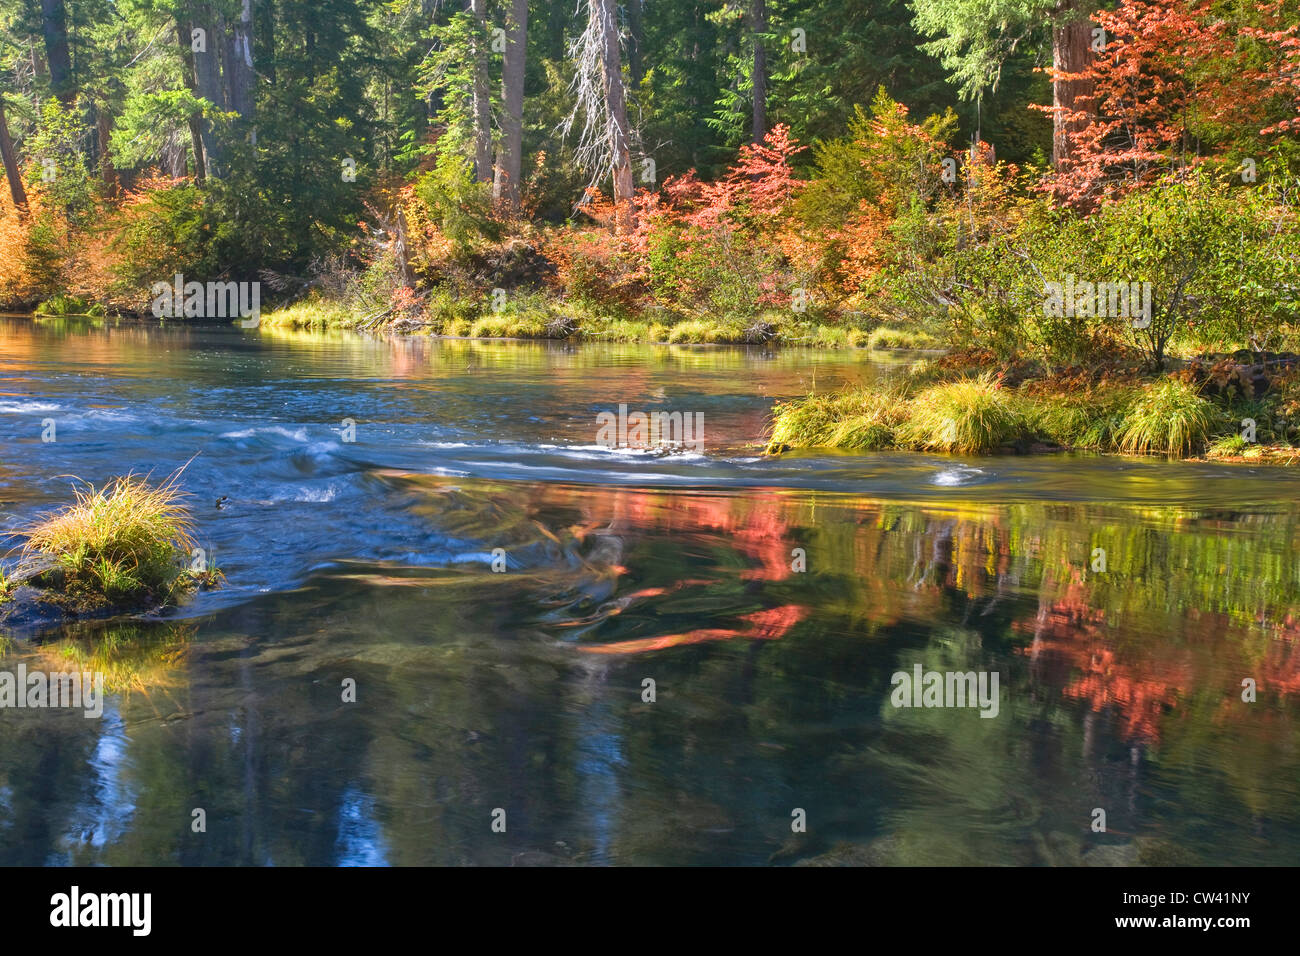 Reflection of trees in water, Rogue River, Rogue River National Forest, Oregon, USA Stock Photo